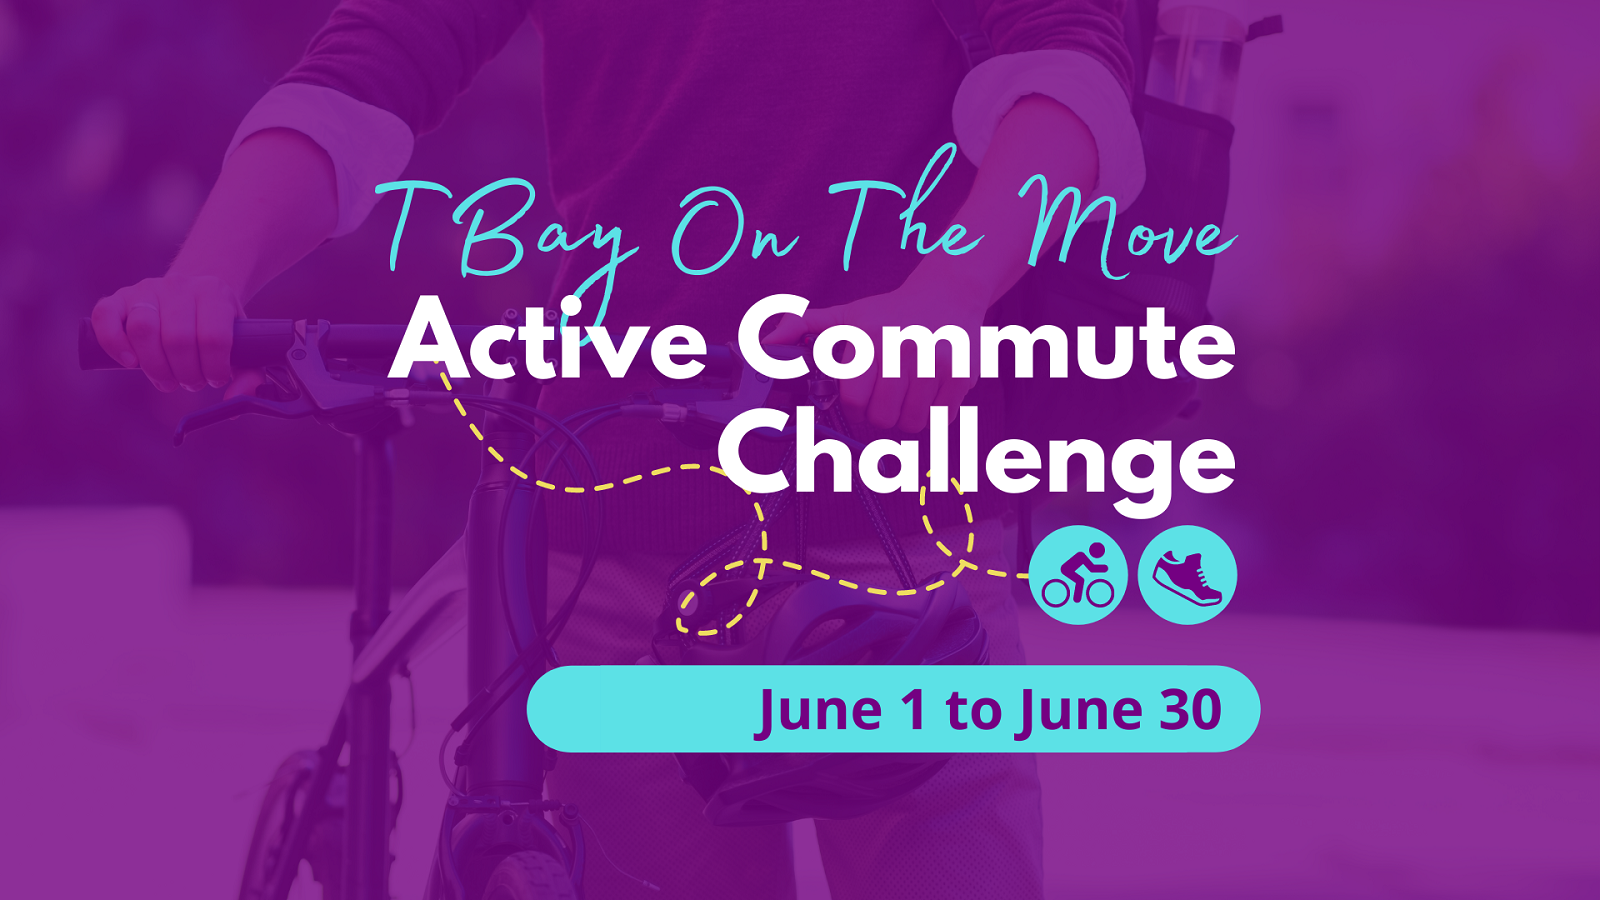 TBay on the Move: Are You Up For the Challenge?